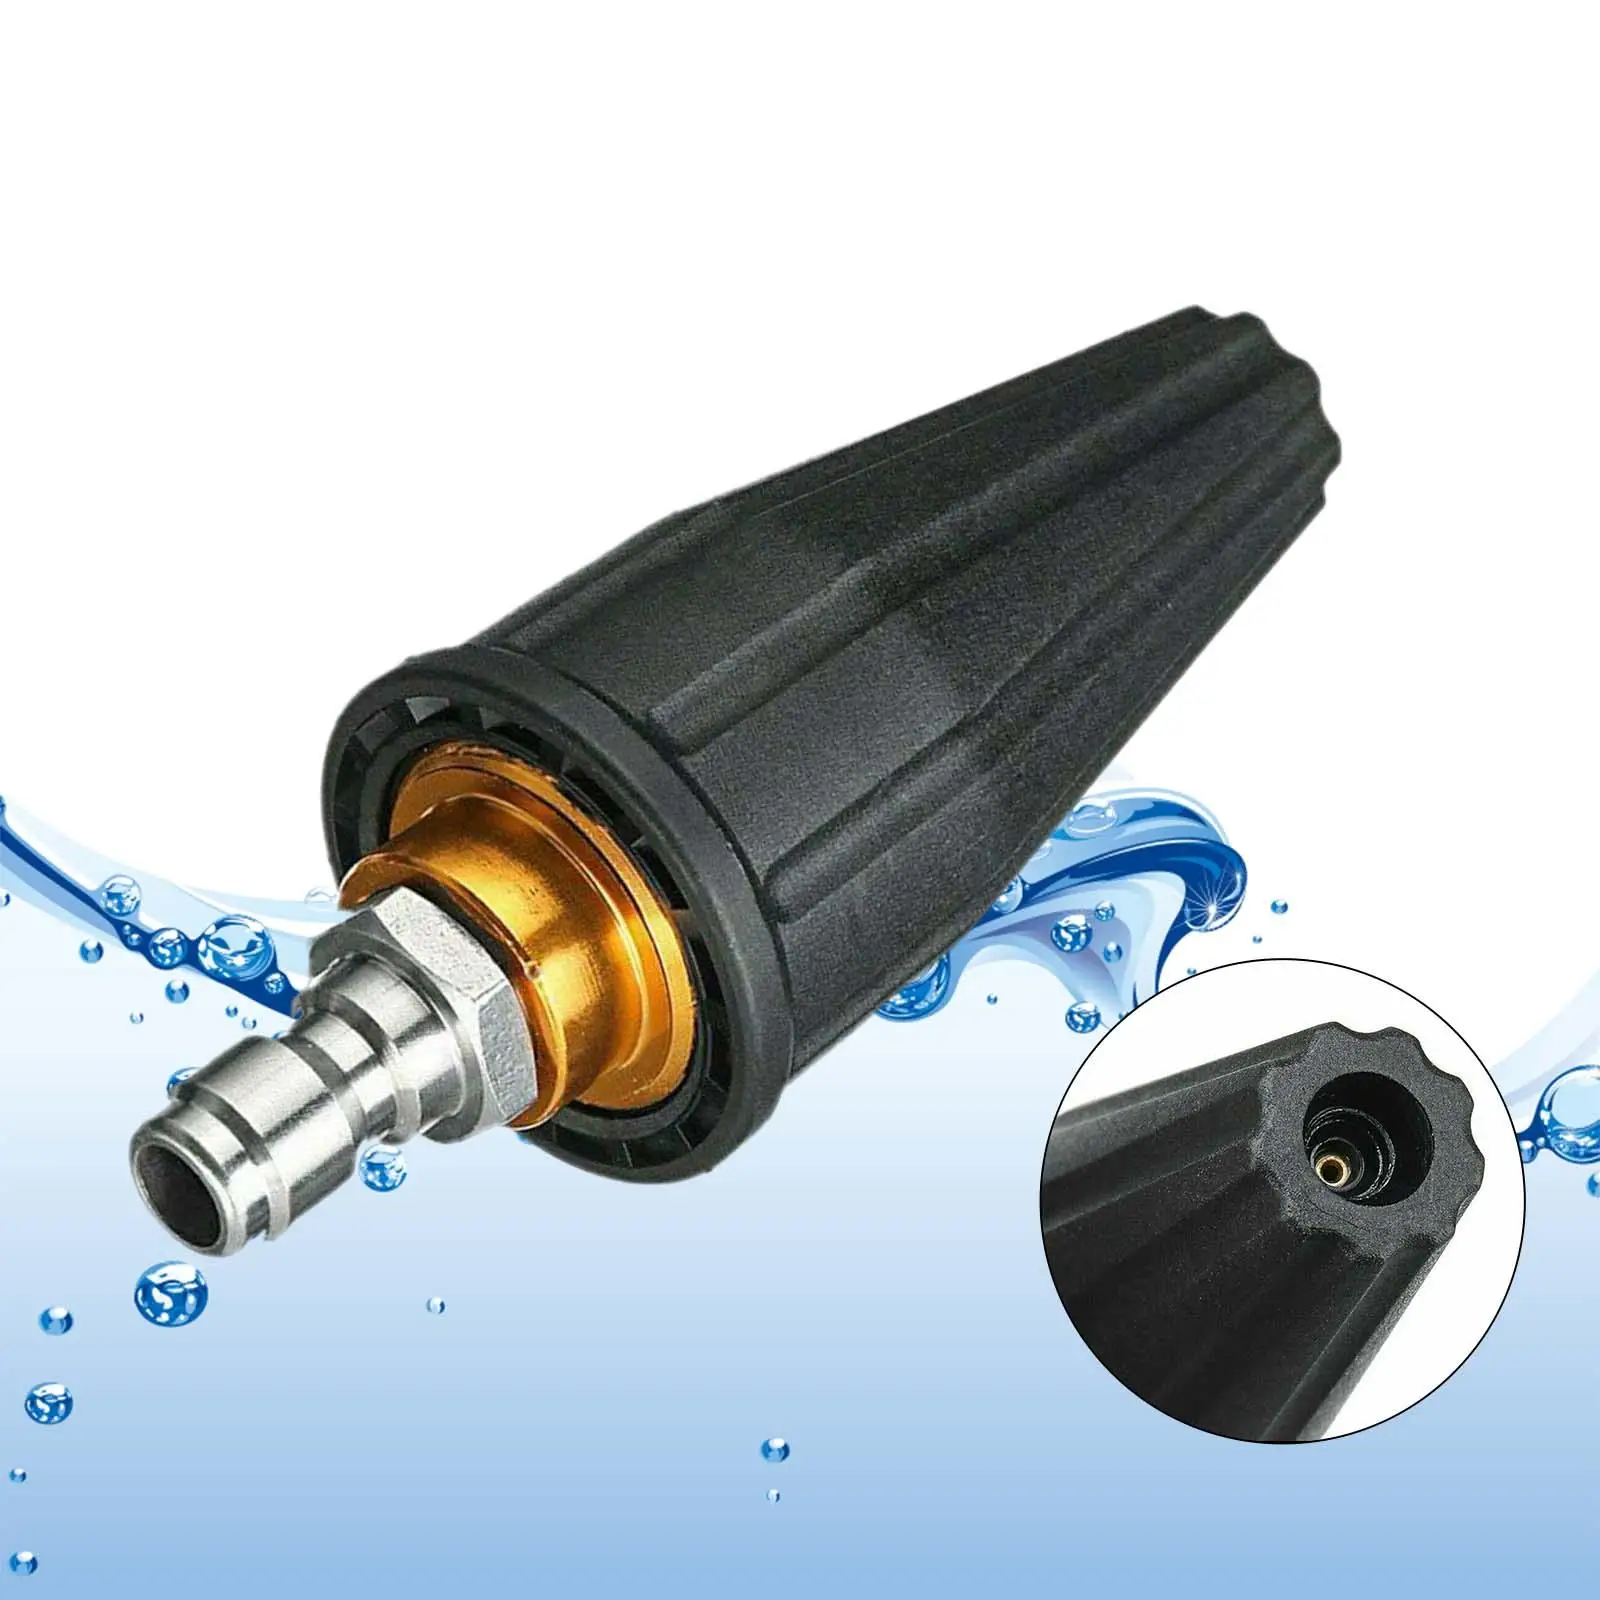 Quick-Connect Turbo Spray Nozzle for Pressure Washers with 5 Tips 1/4 Inch Quick Connect 0152540 Degrees,Soap